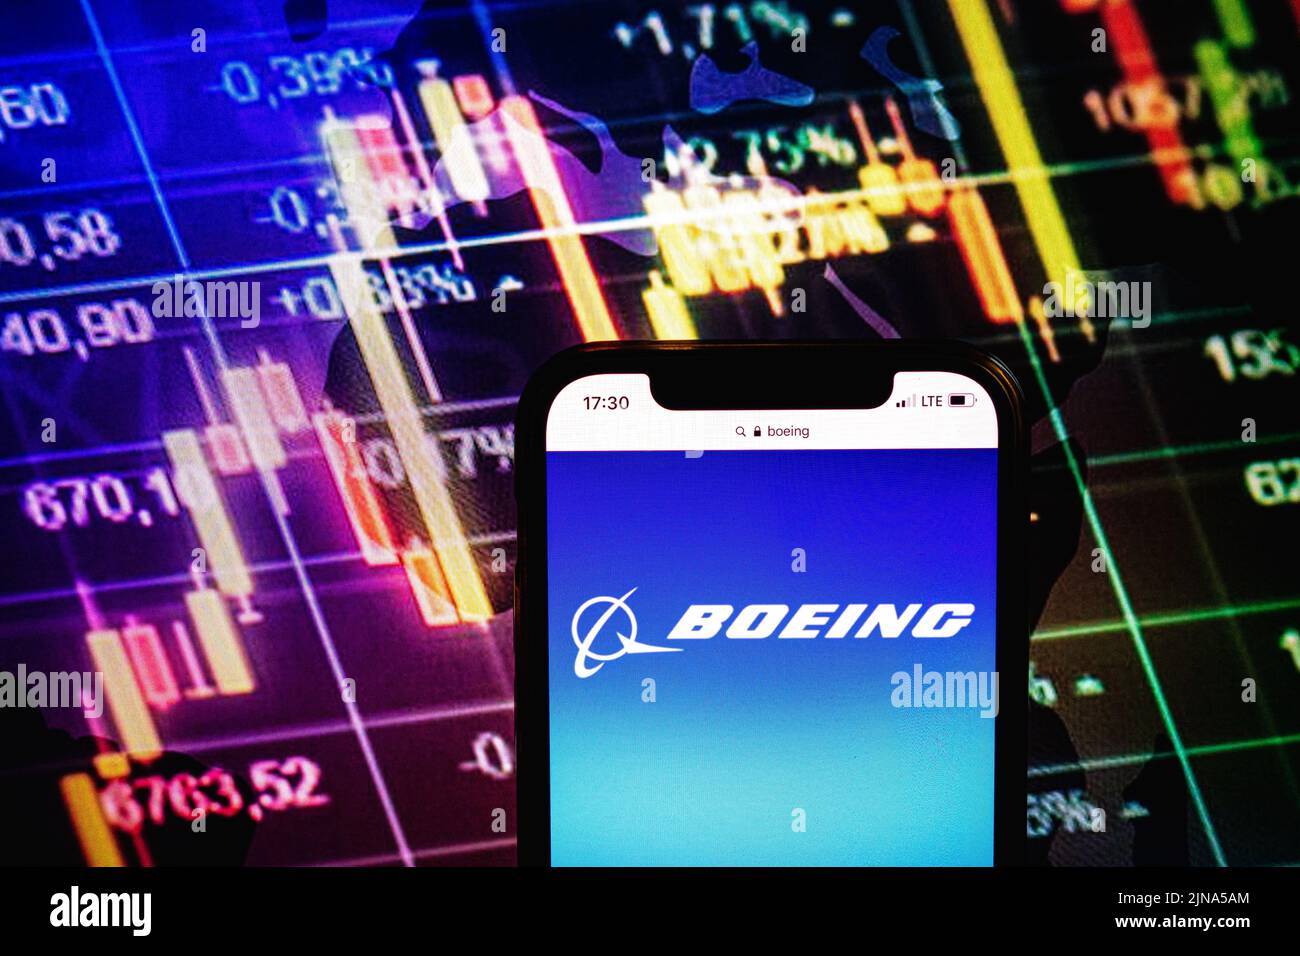 KONSKIE, POLAND - August 09, 2022: Smartphone displaying logo of Boeing company on stock exchange diagram background Stock Photo